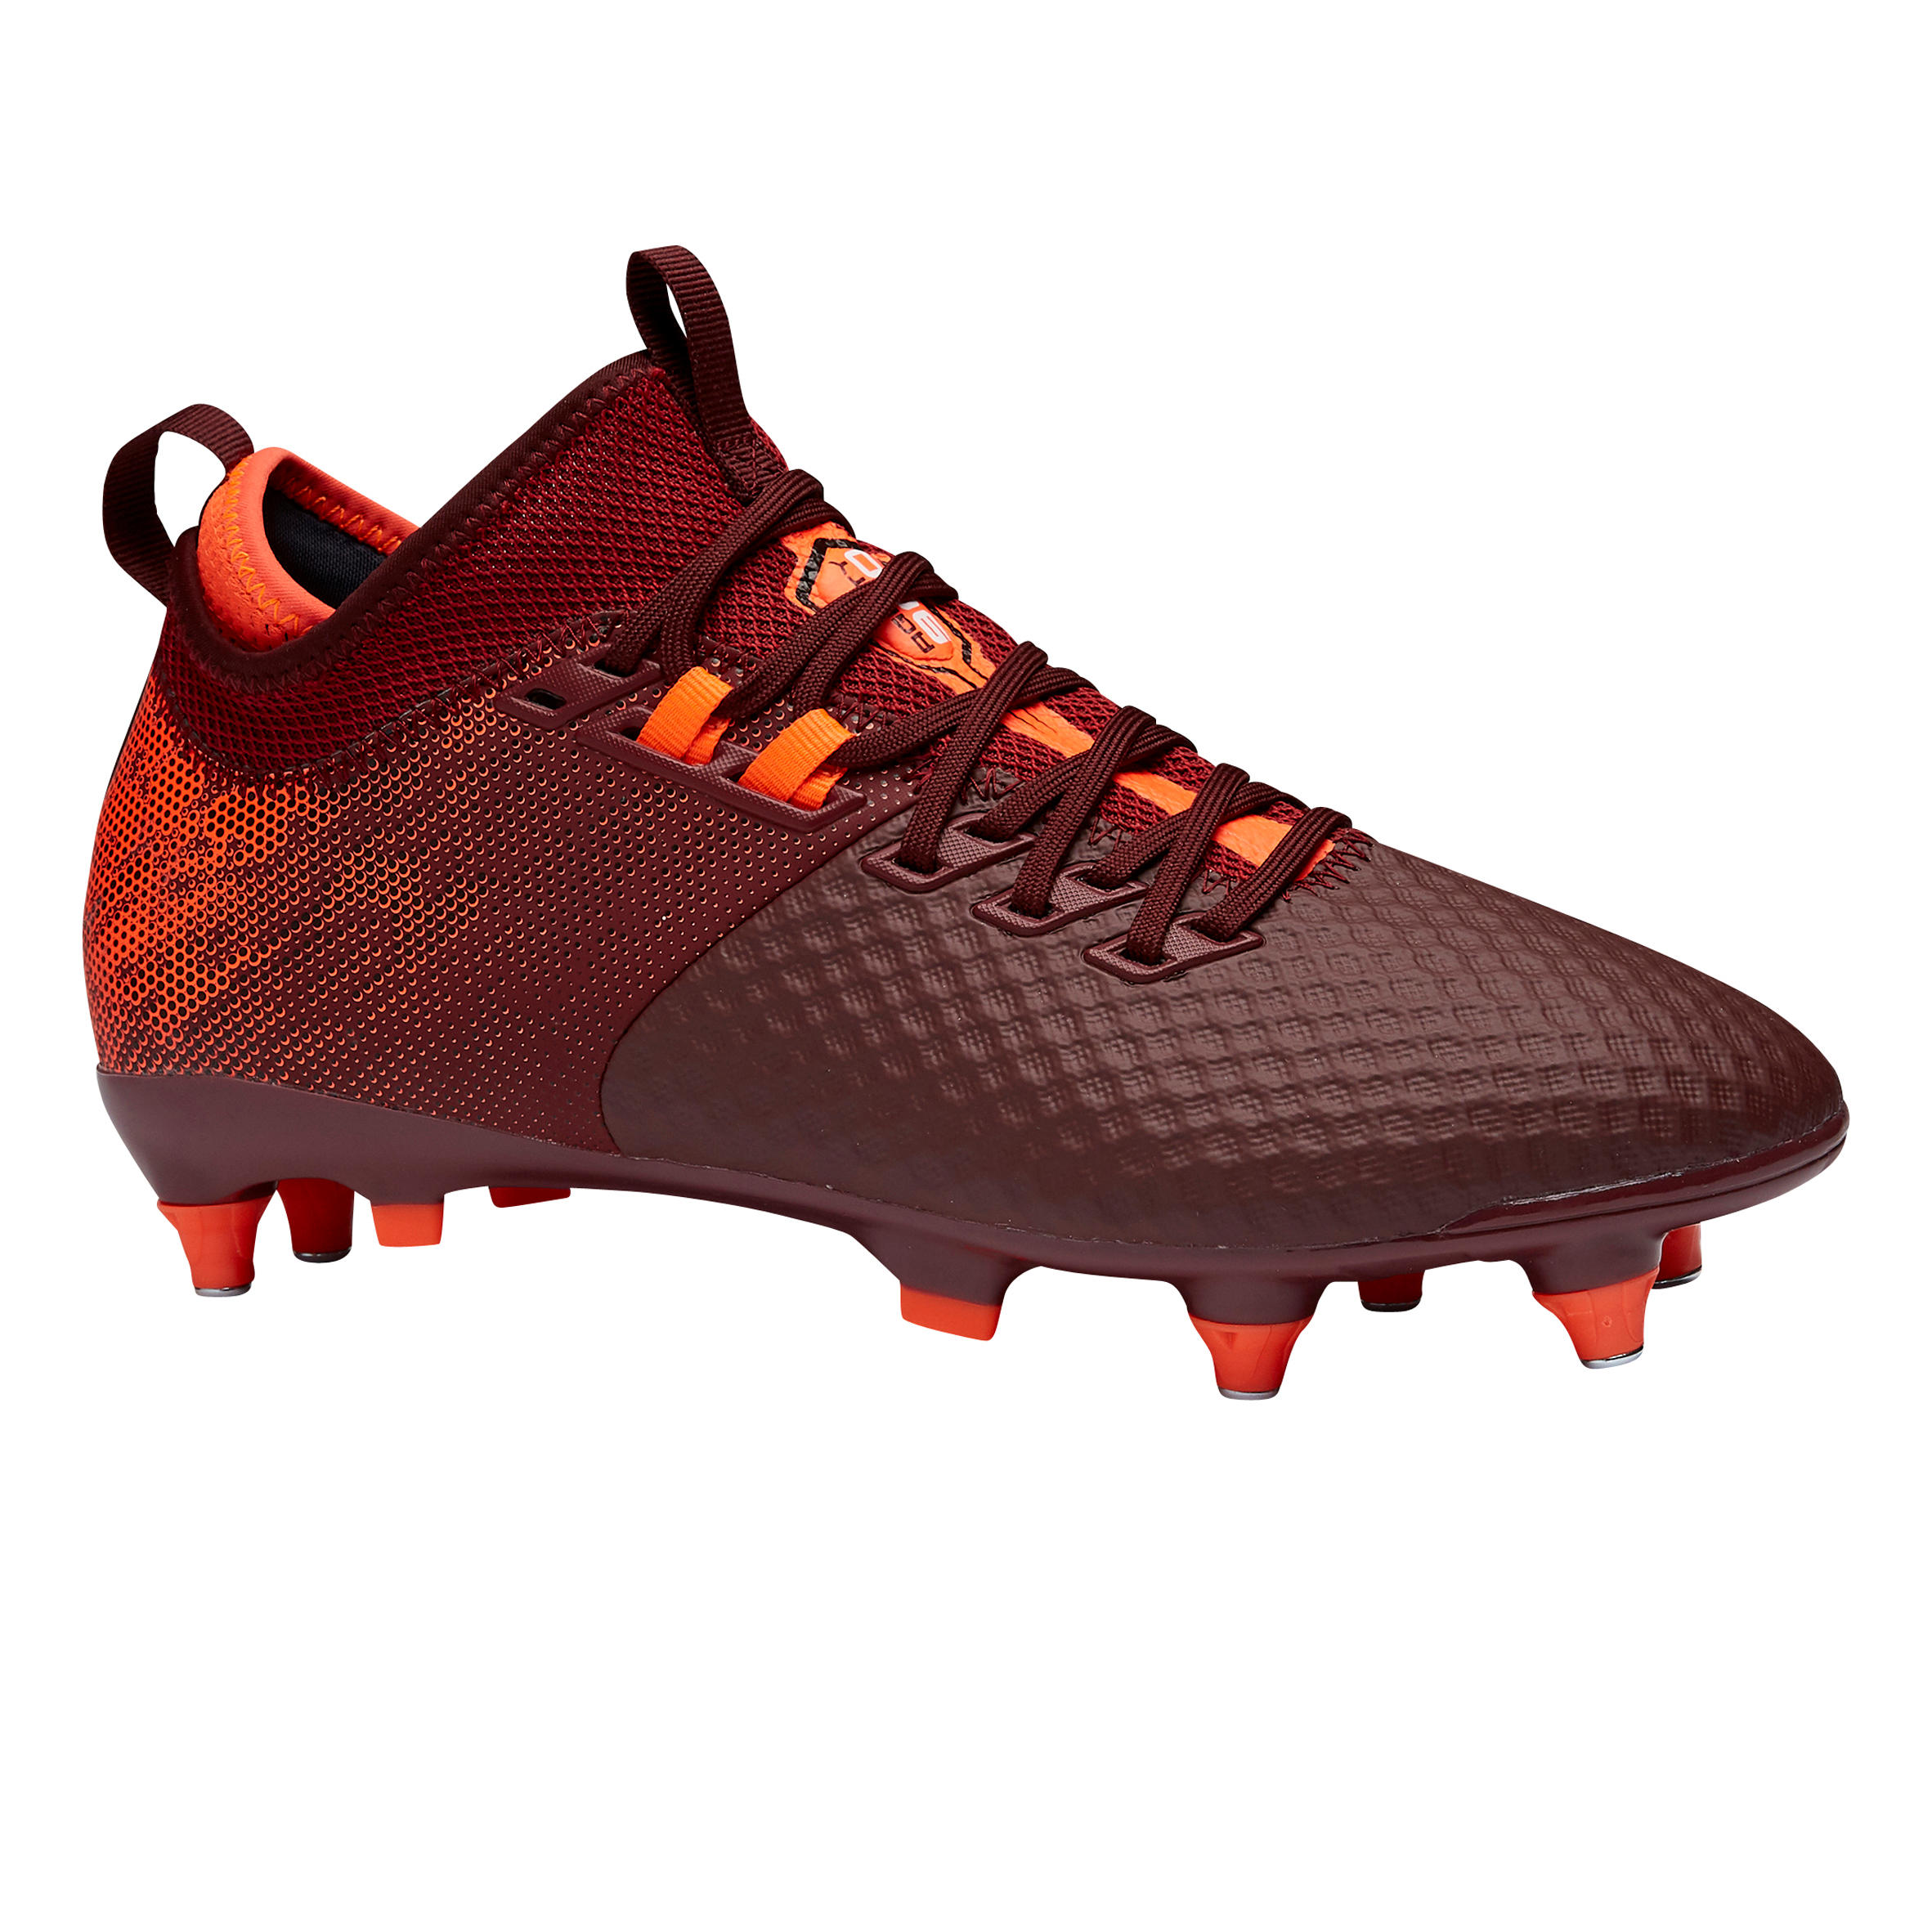 Adult Soft Ground Football Boots 